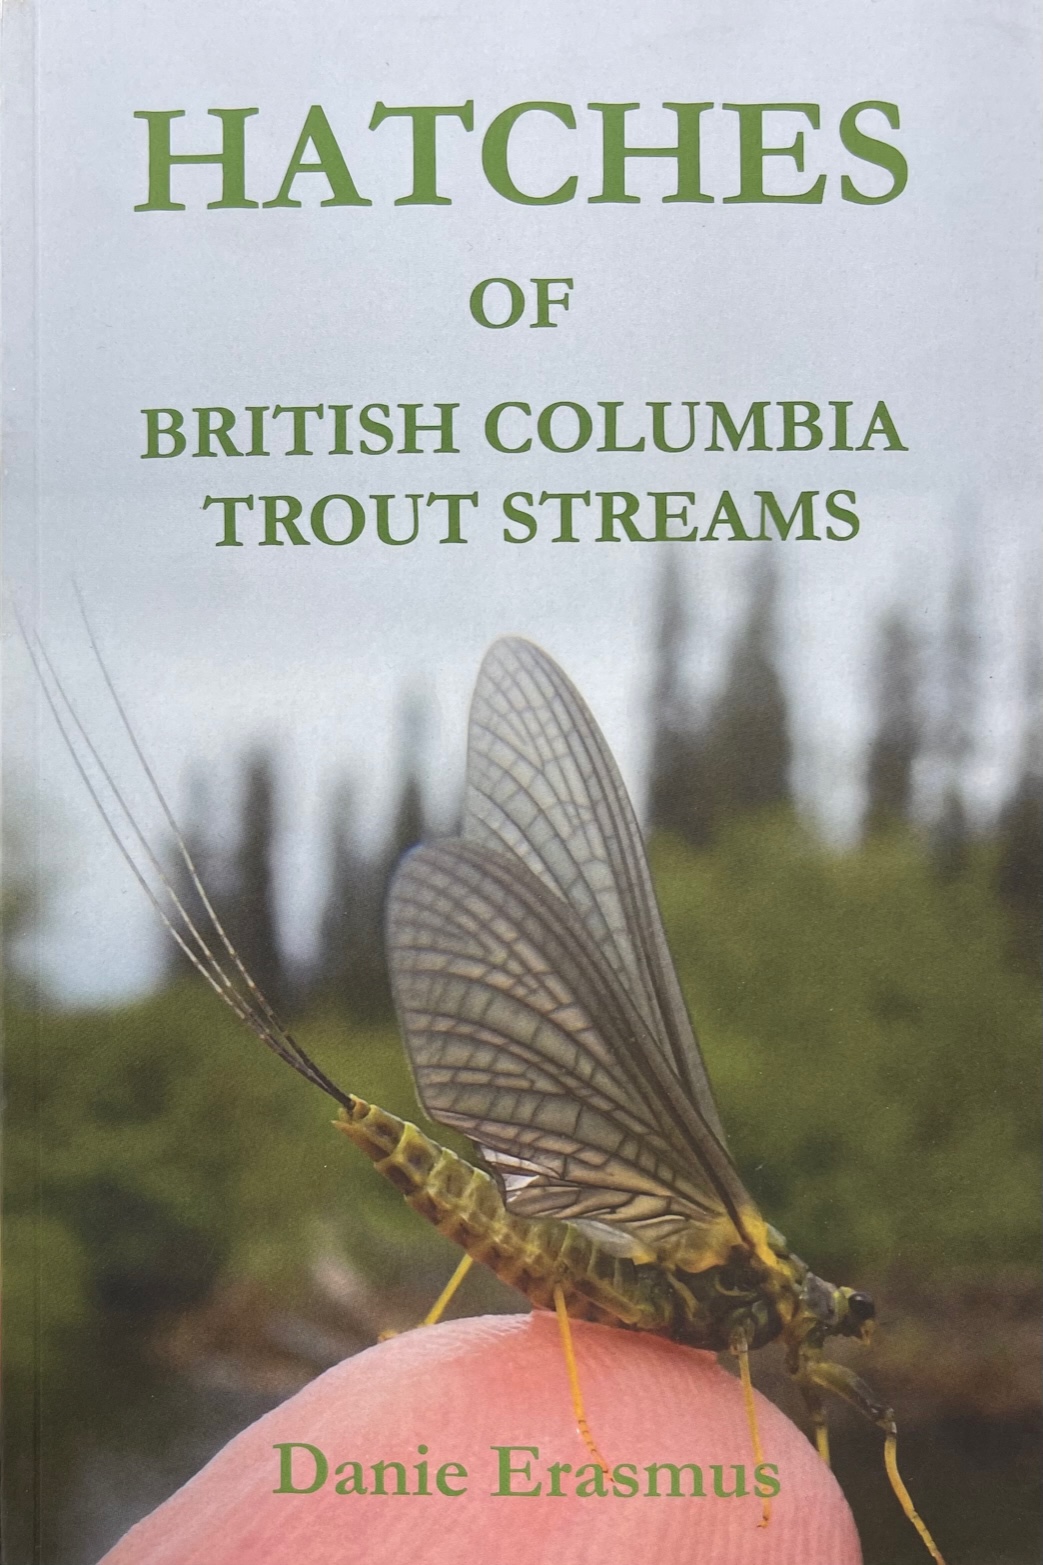 Misc Hatches of British Columbia Trout Streams